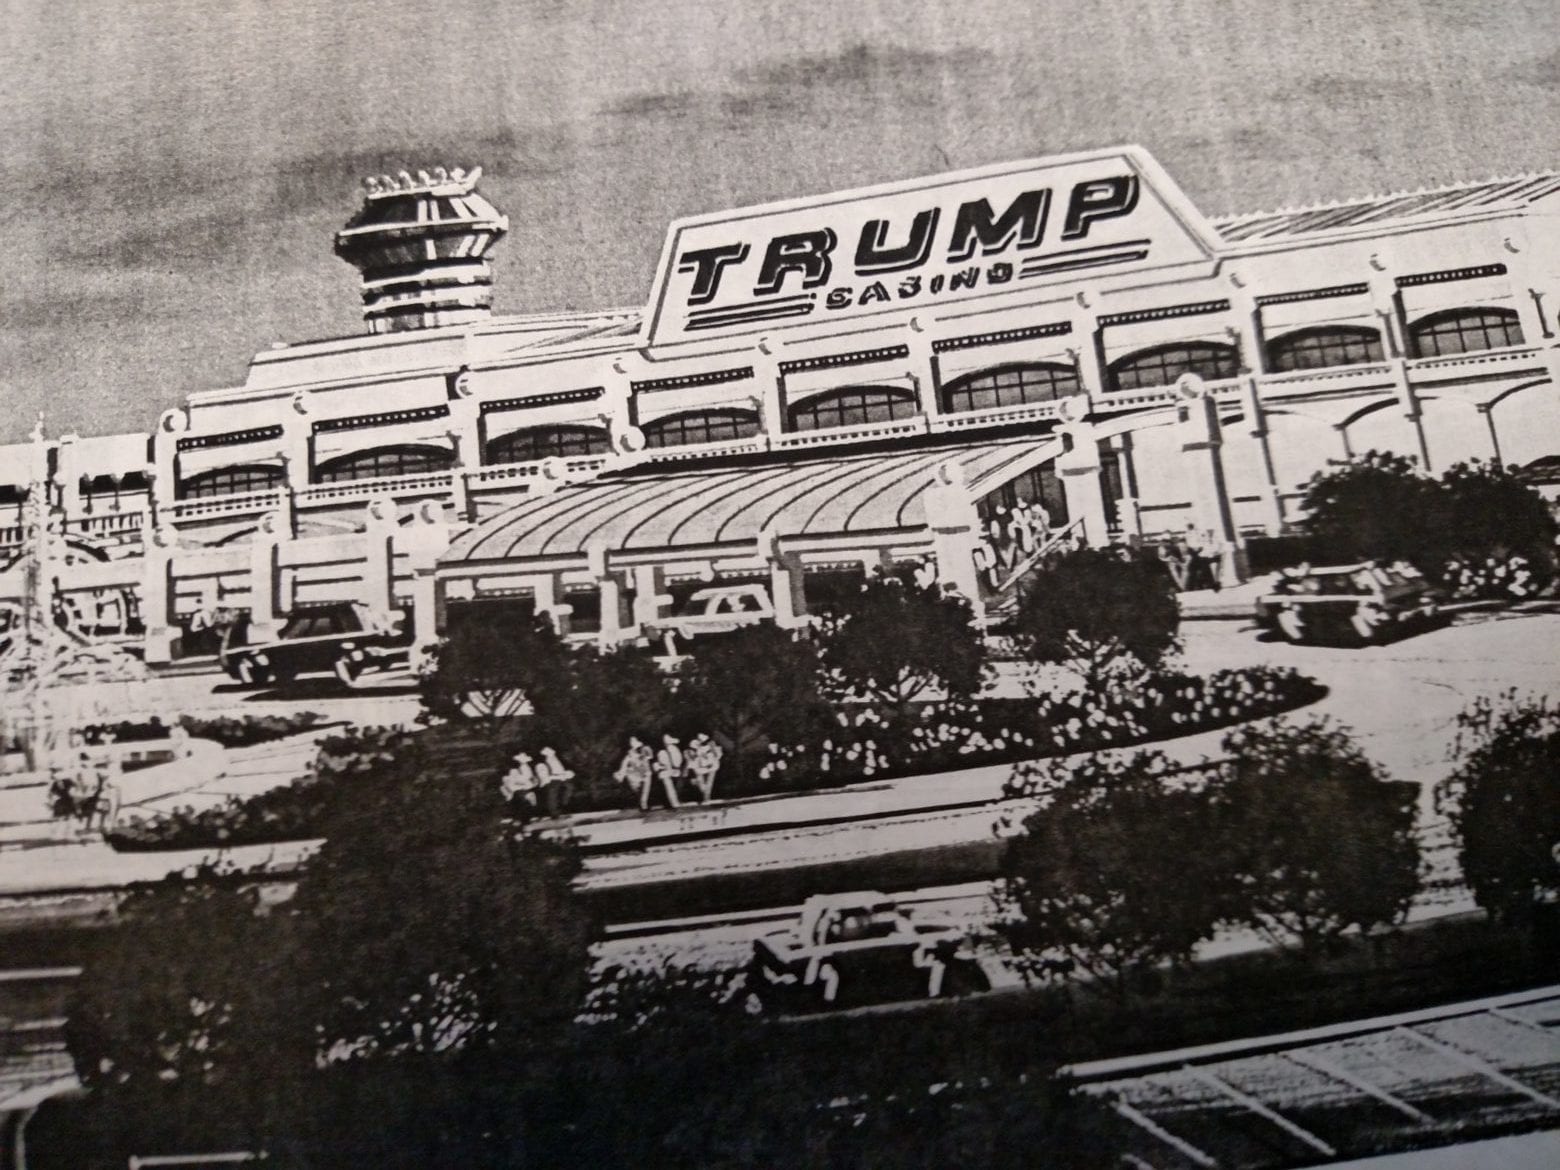 a rendering of a casino owned by Trump